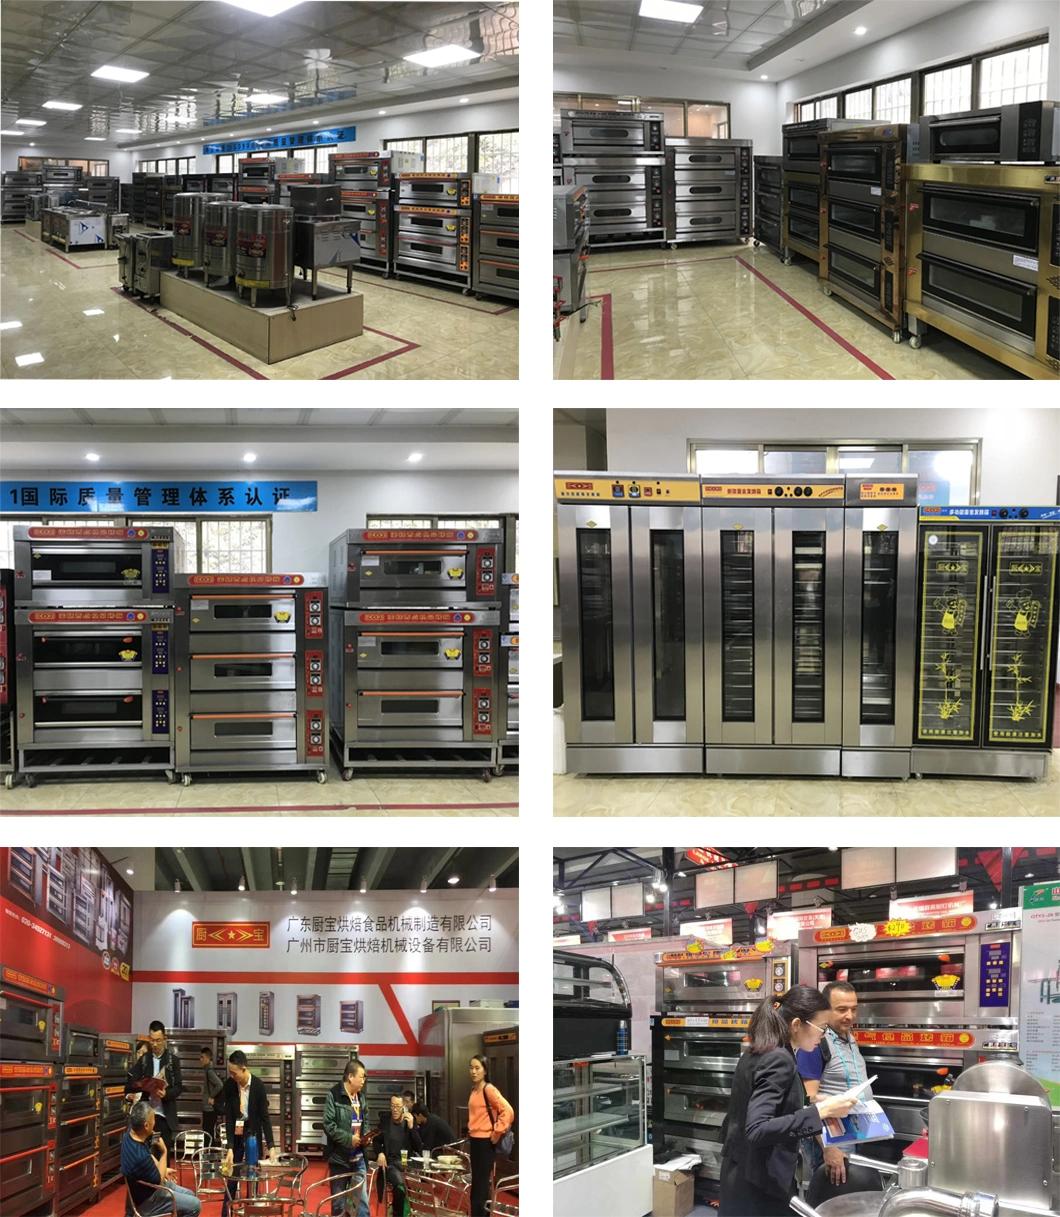 4 Deck 16 Trays Electric Pizza Oven for Commercial Kitchen Baking Equipment Bakery Machine Food Machinery